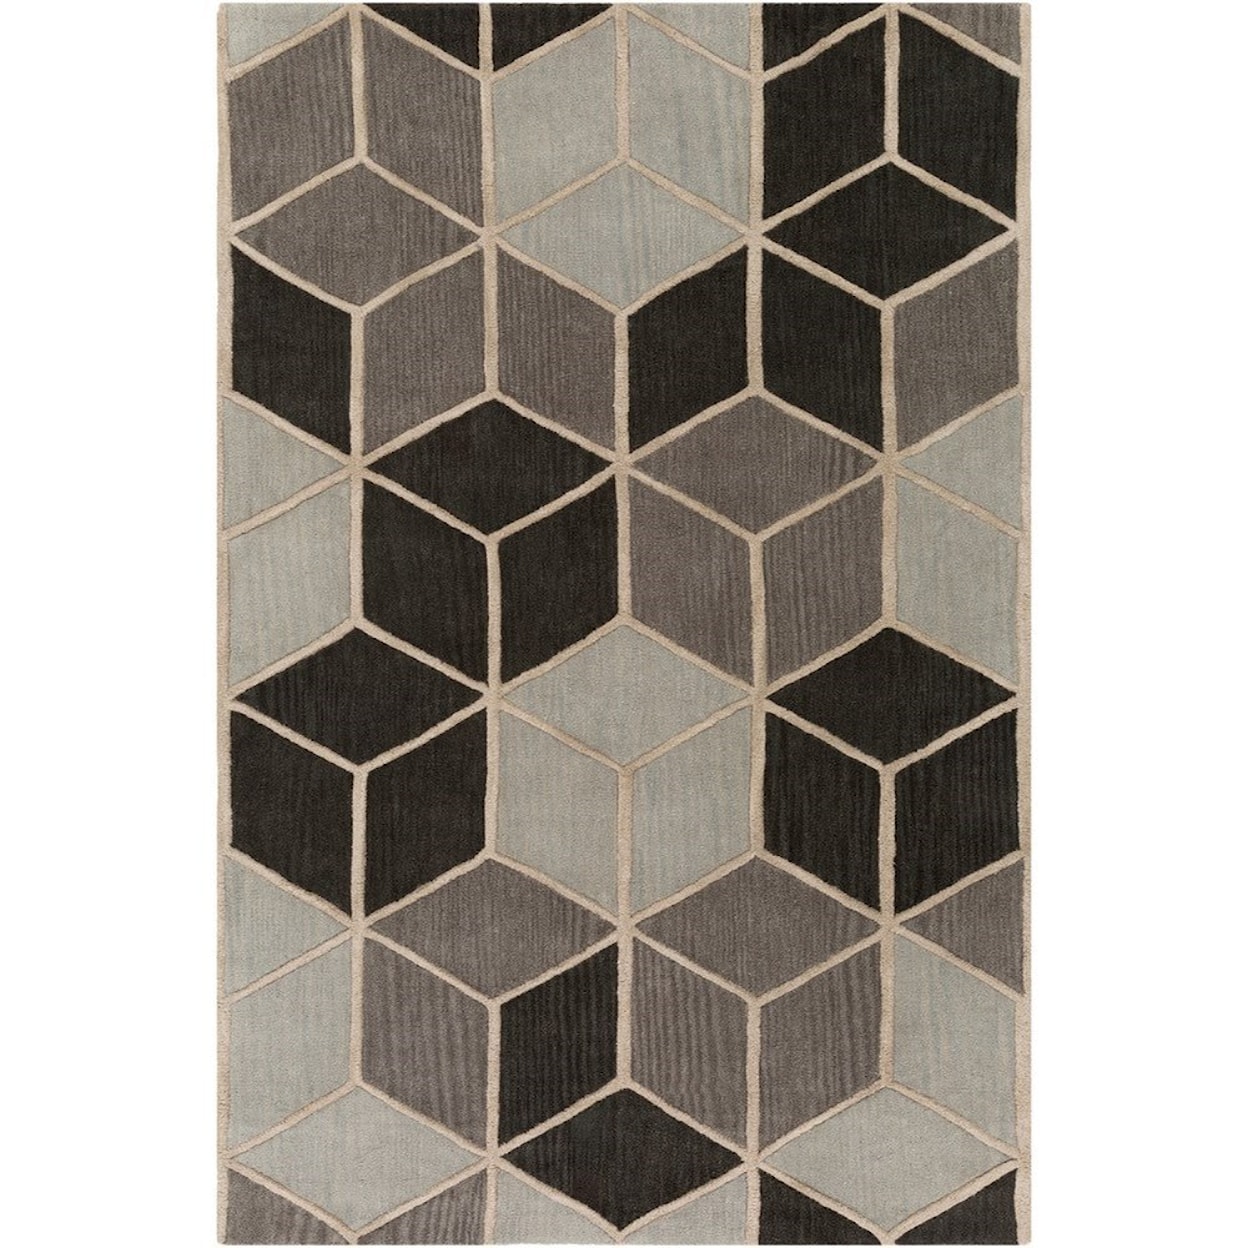 Ruby-Gordon Accents Oasis 2' x 3' Rug